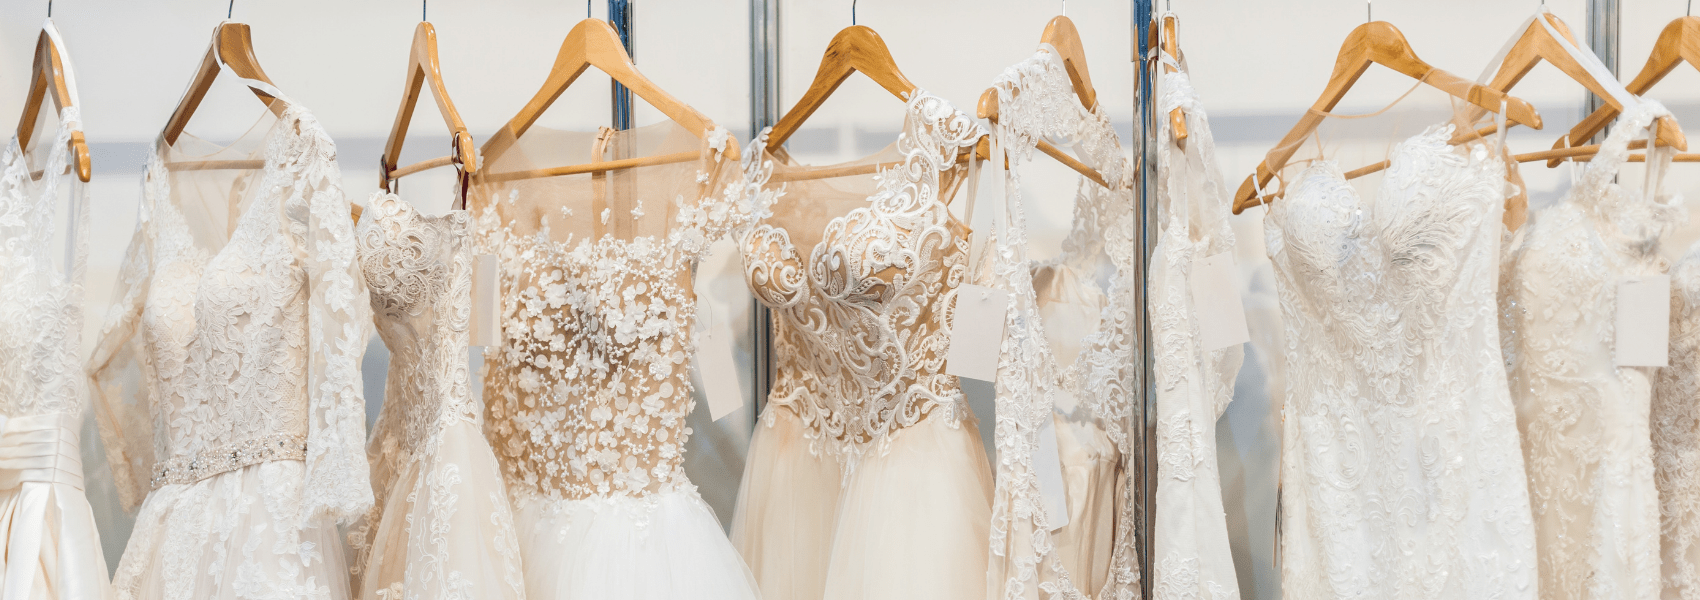 Finding Family at the Adorned In Grace Bridal Shop